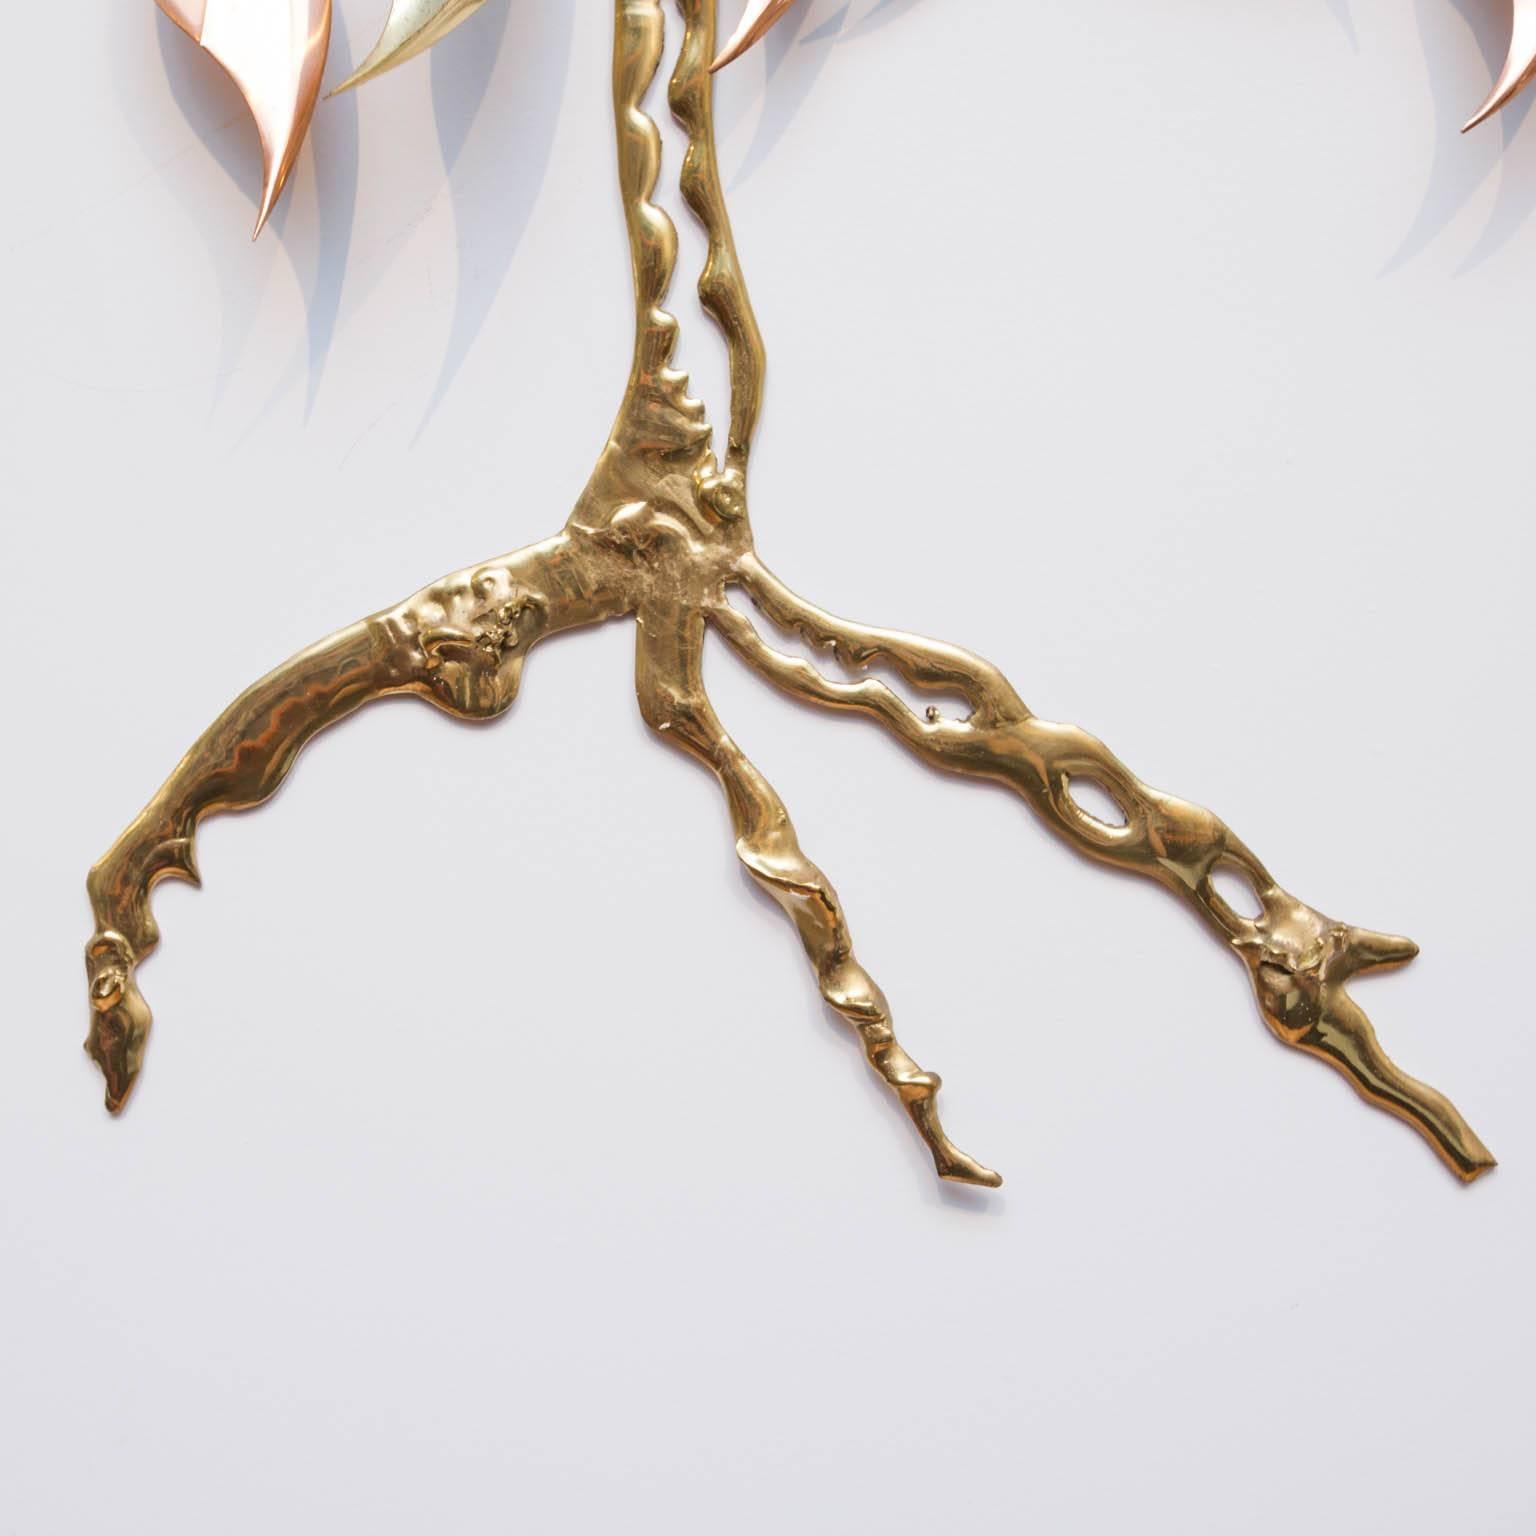 Dramatic Jere style sculpture of a tree with multi-metal leaves and a shiny brass trunk.